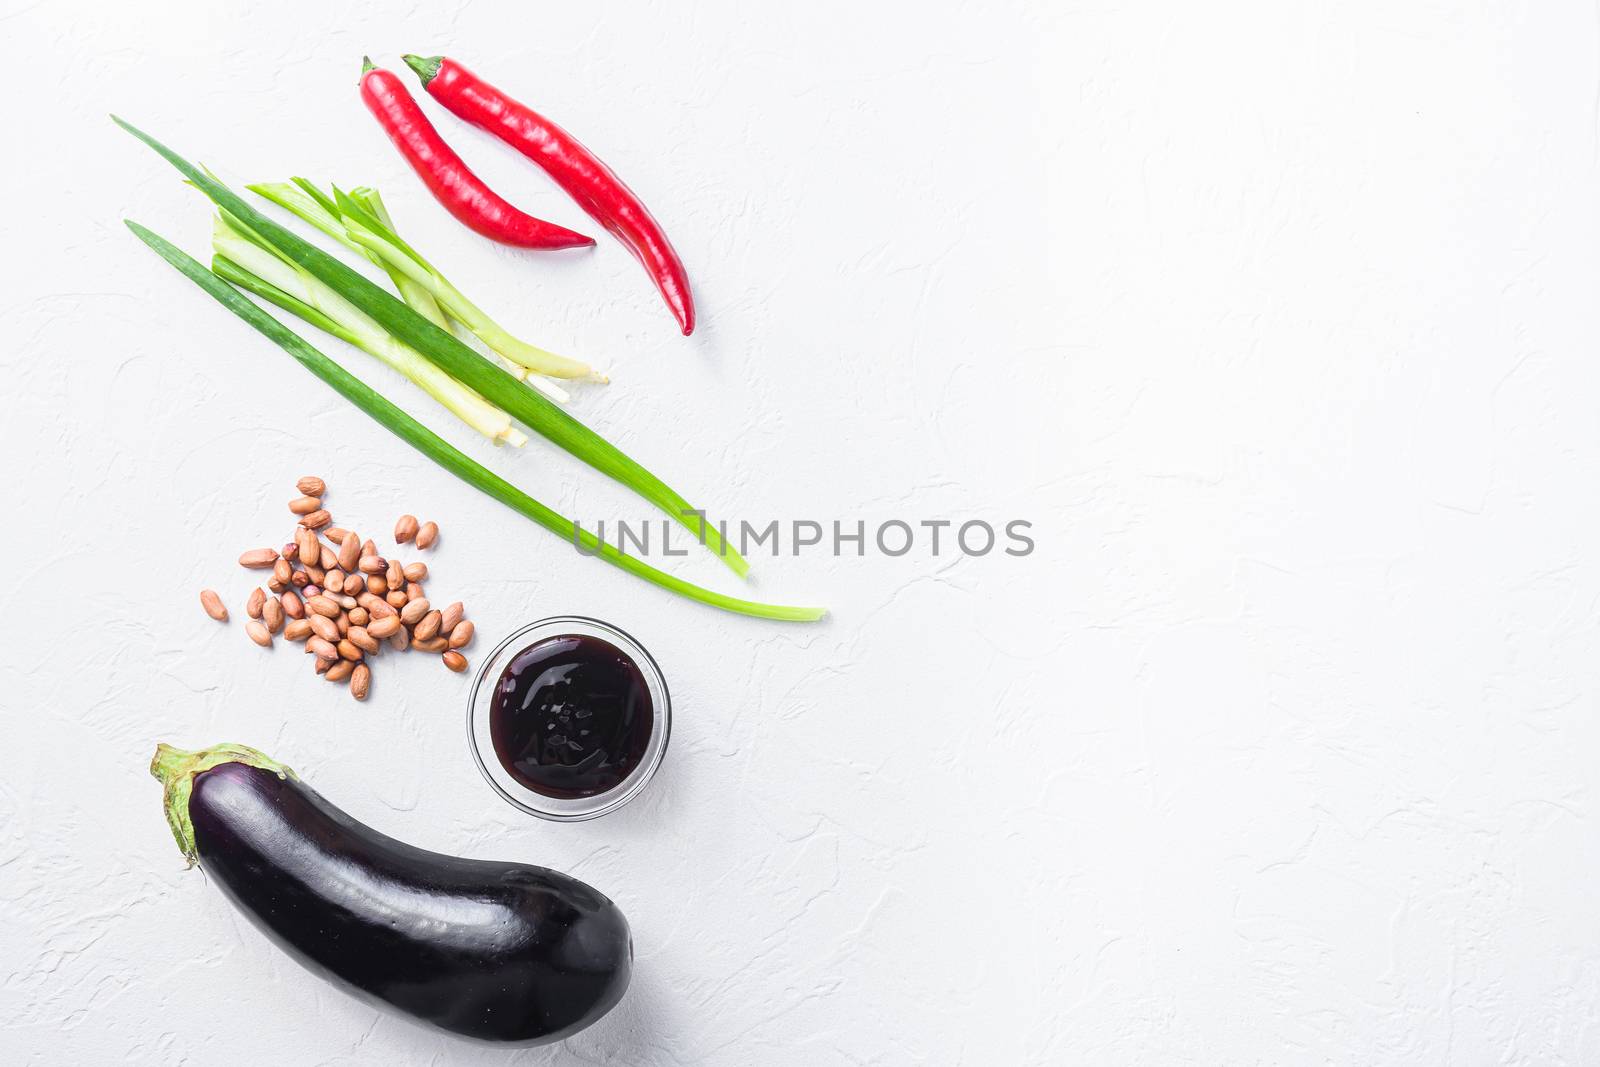 Baked aubergine ingredients, for cooking or grill chili pepper, eggplant, sauce, nuts on white background top view space for text by Ilianesolenyi